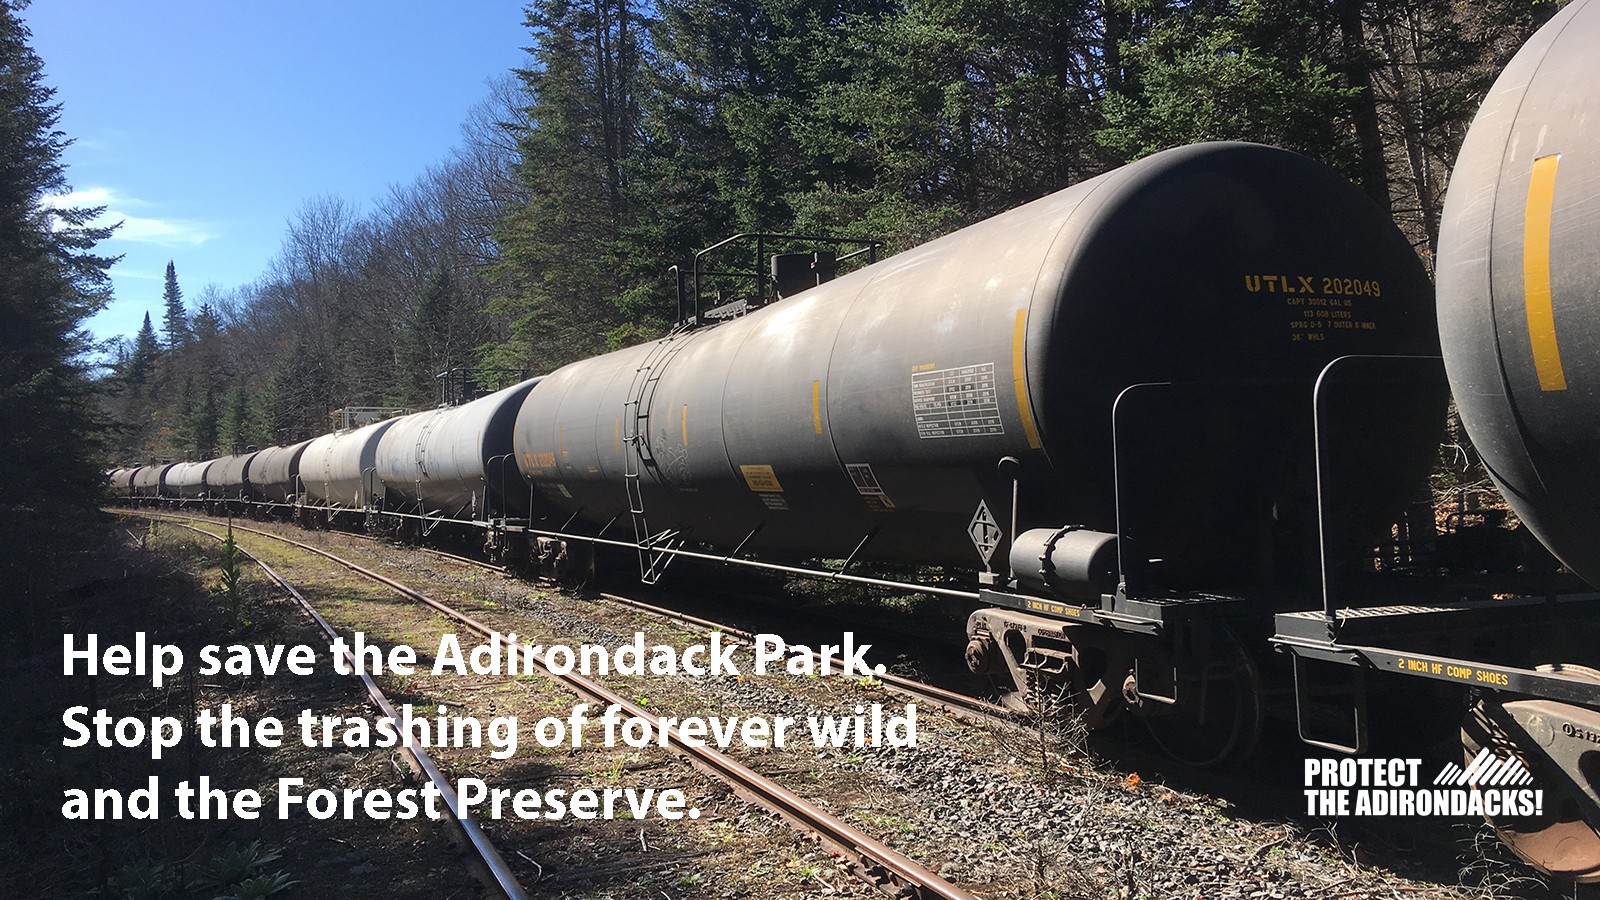 Three shipments of used oil tankers have been transported to the  Adirondacks for indefinite storage - Protect the Adirondacks!